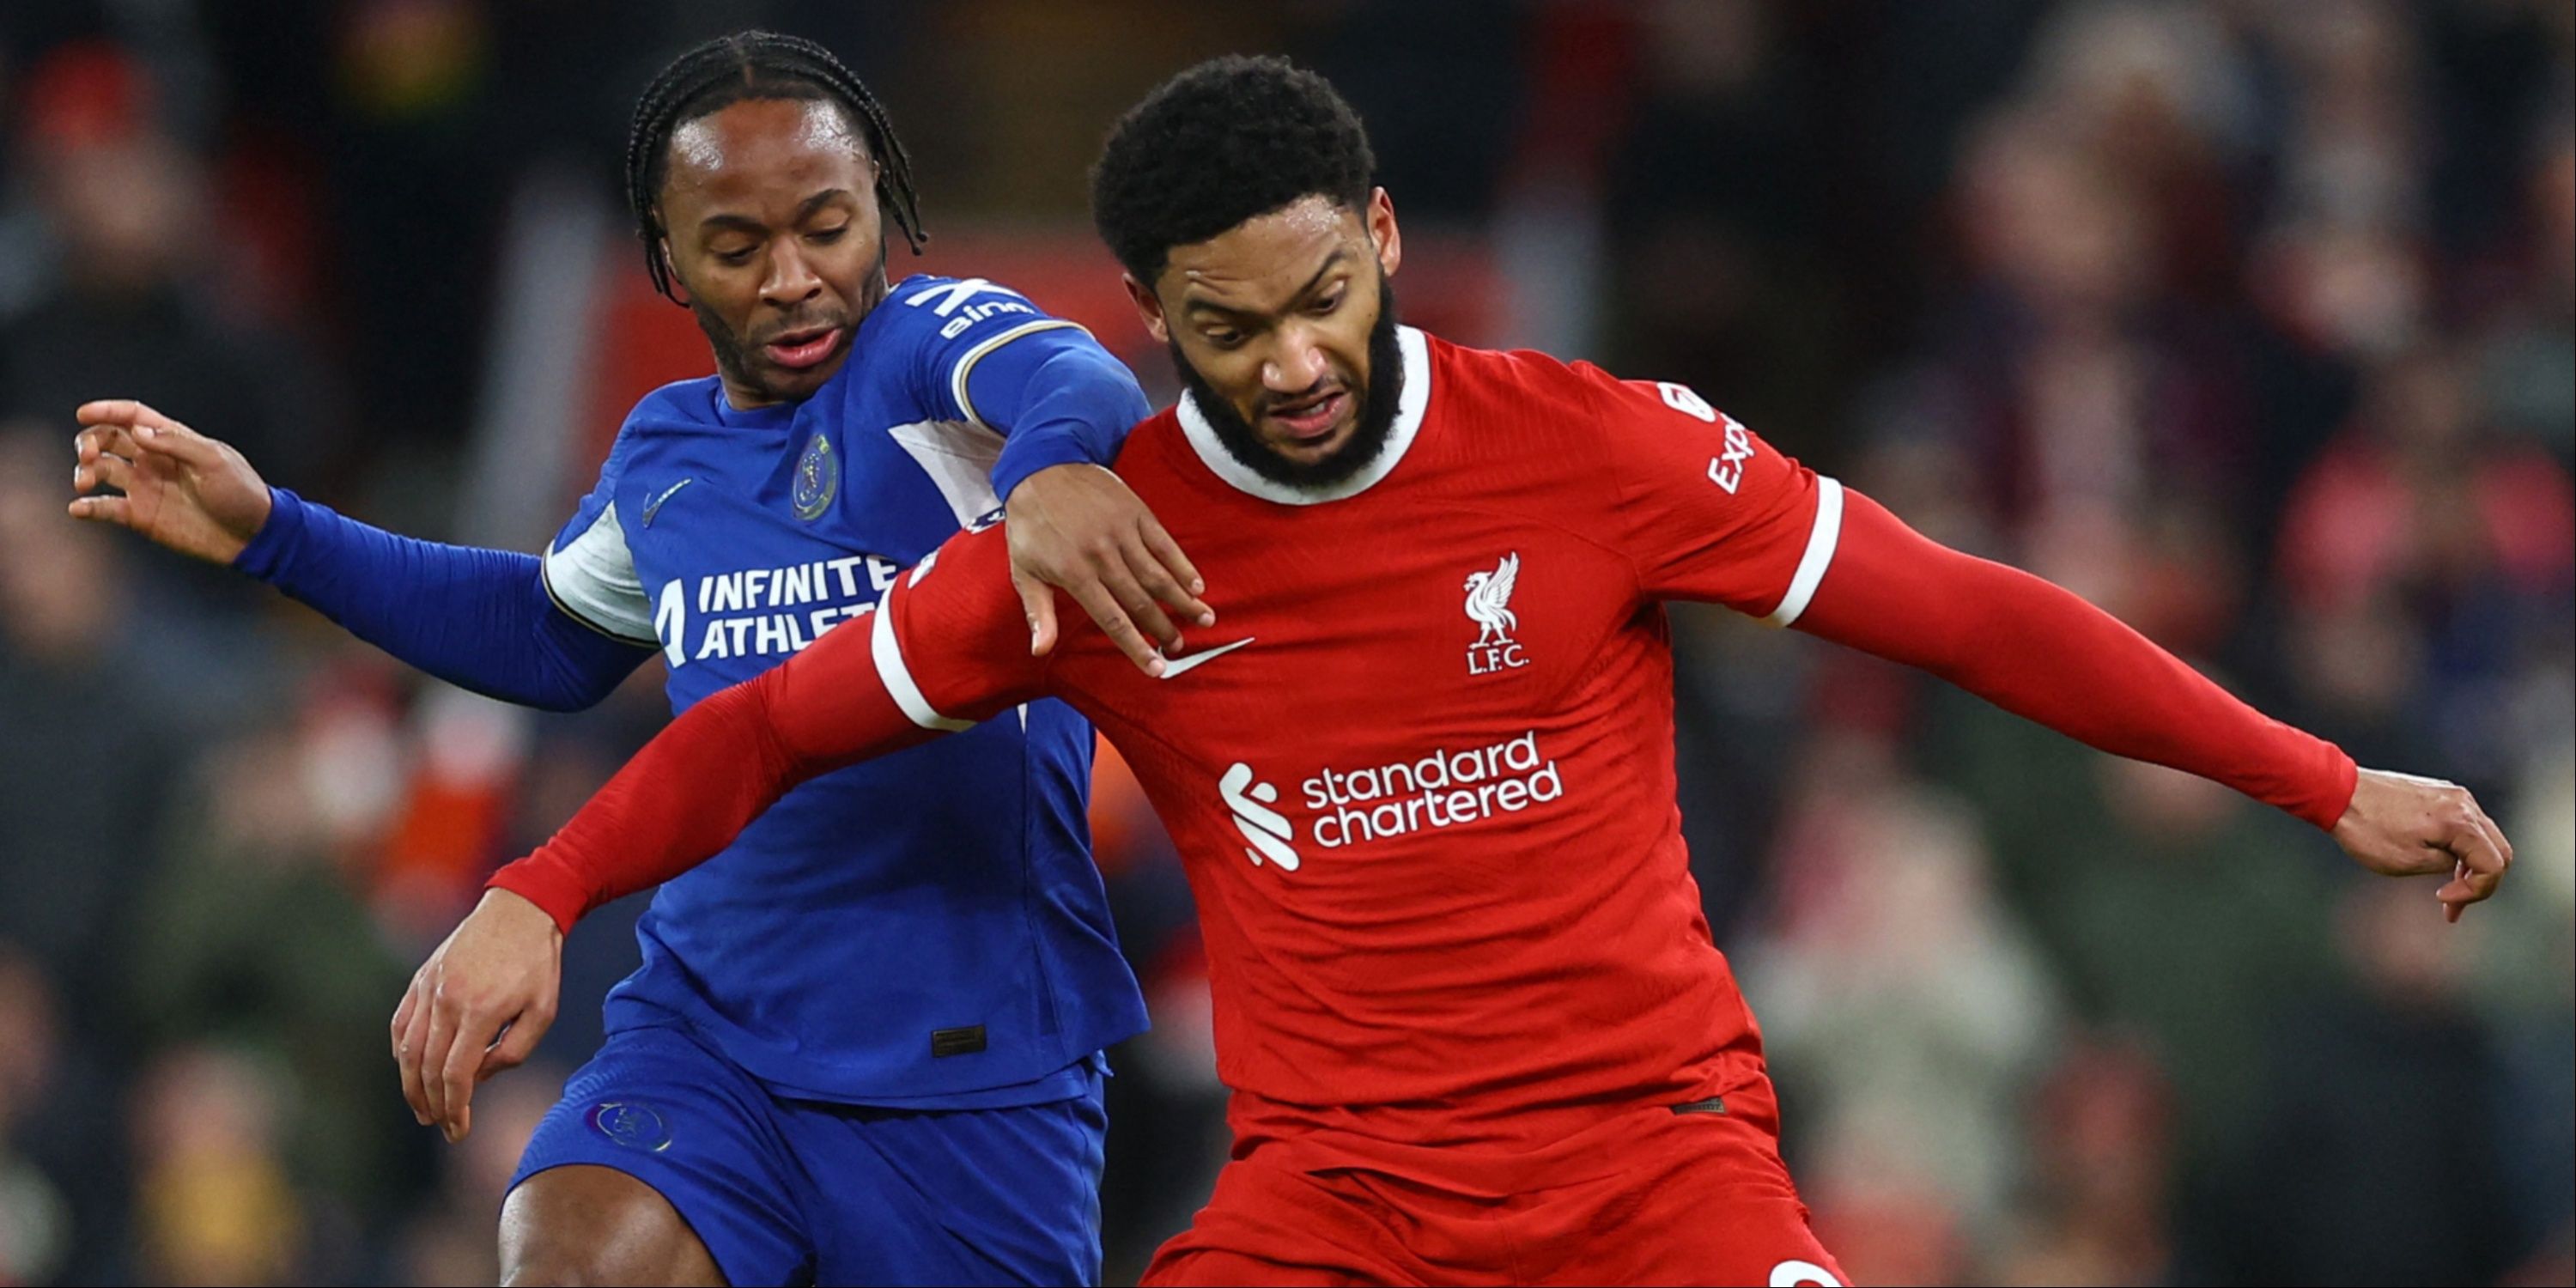 Raheem Sterling and Joe Gomez battle for the ball